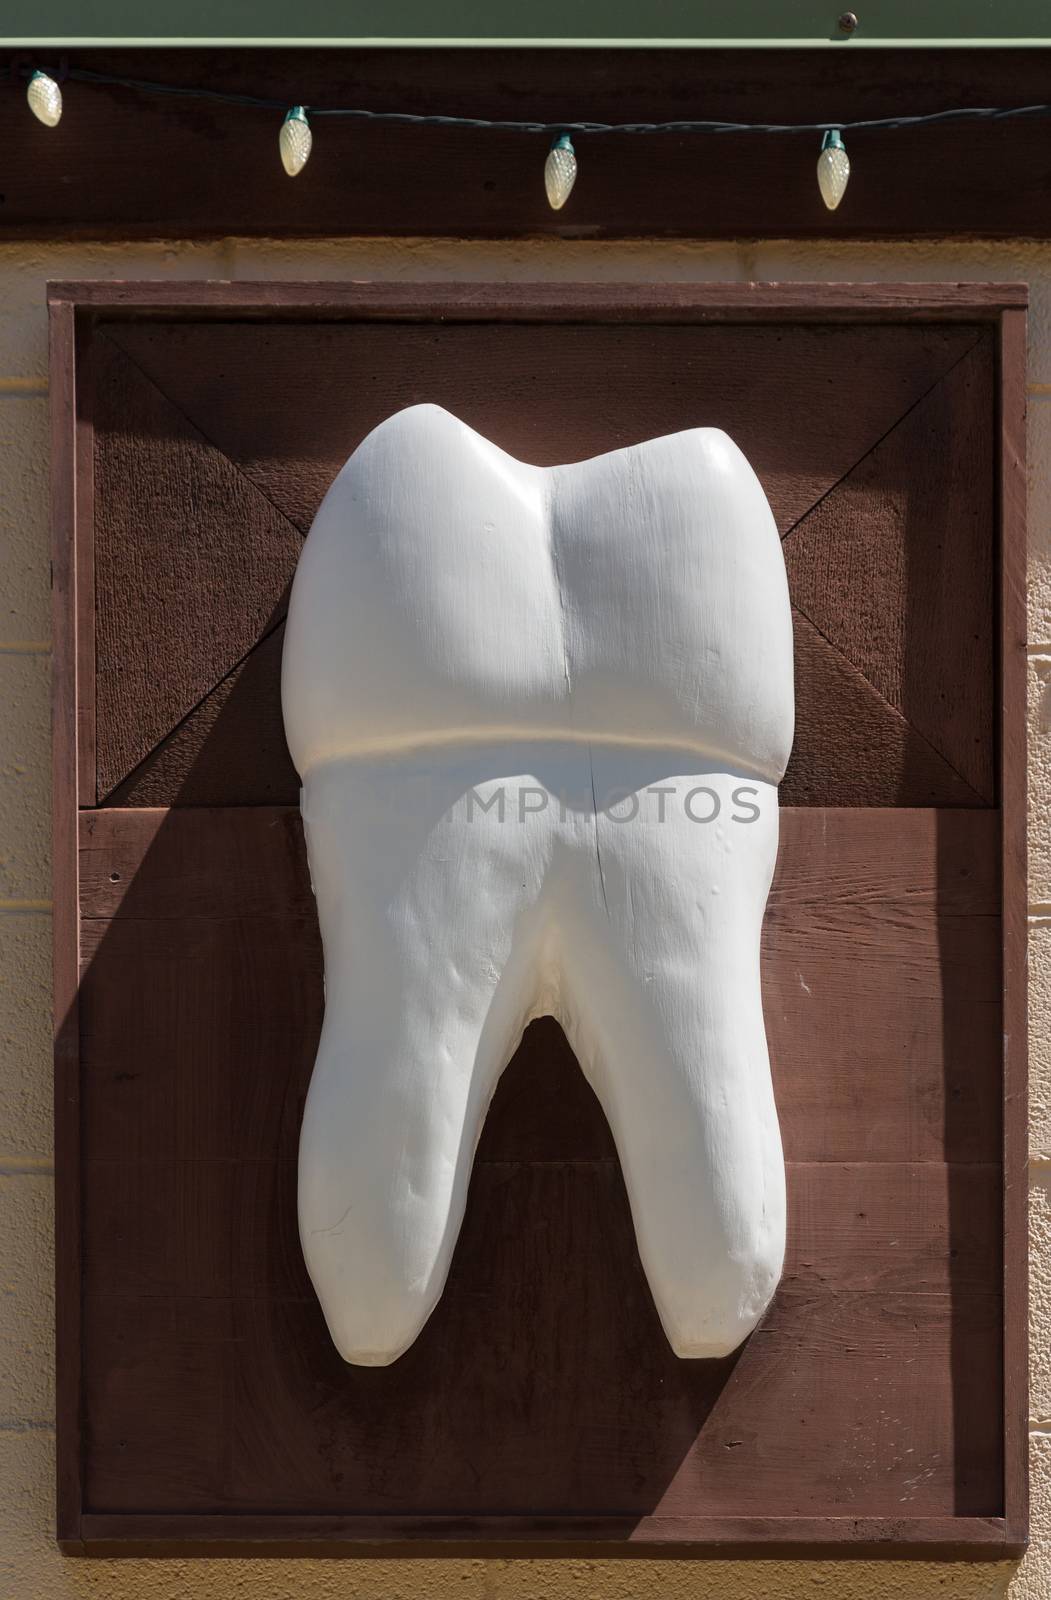 Large wooden tooth sign outside dentist by steheap